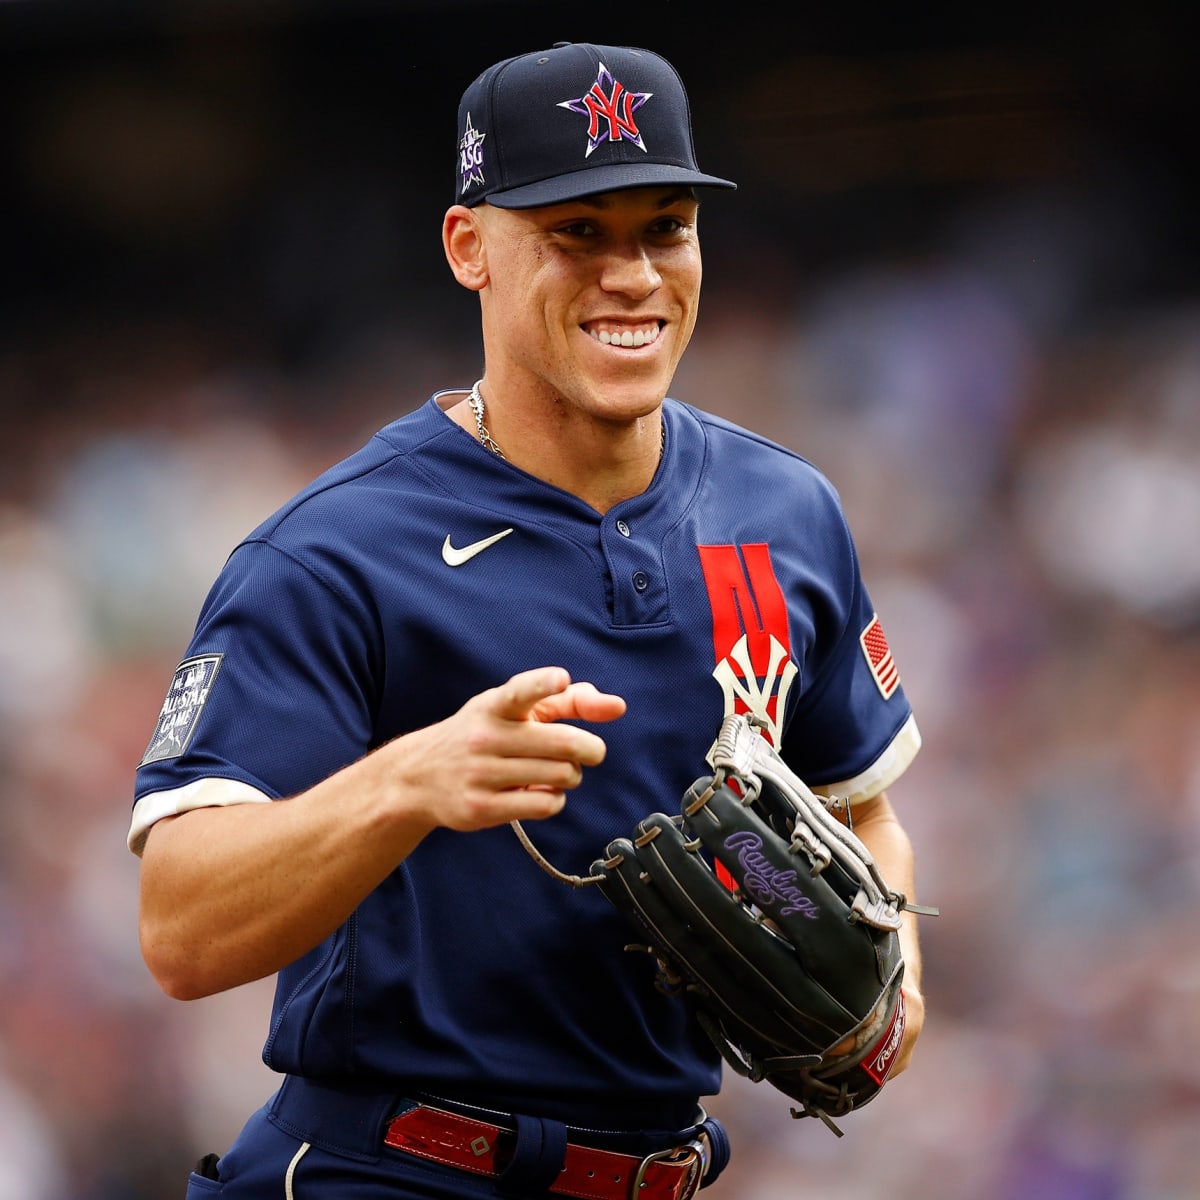 Yankees' Aaron Judge returning to All-Star Game as American League